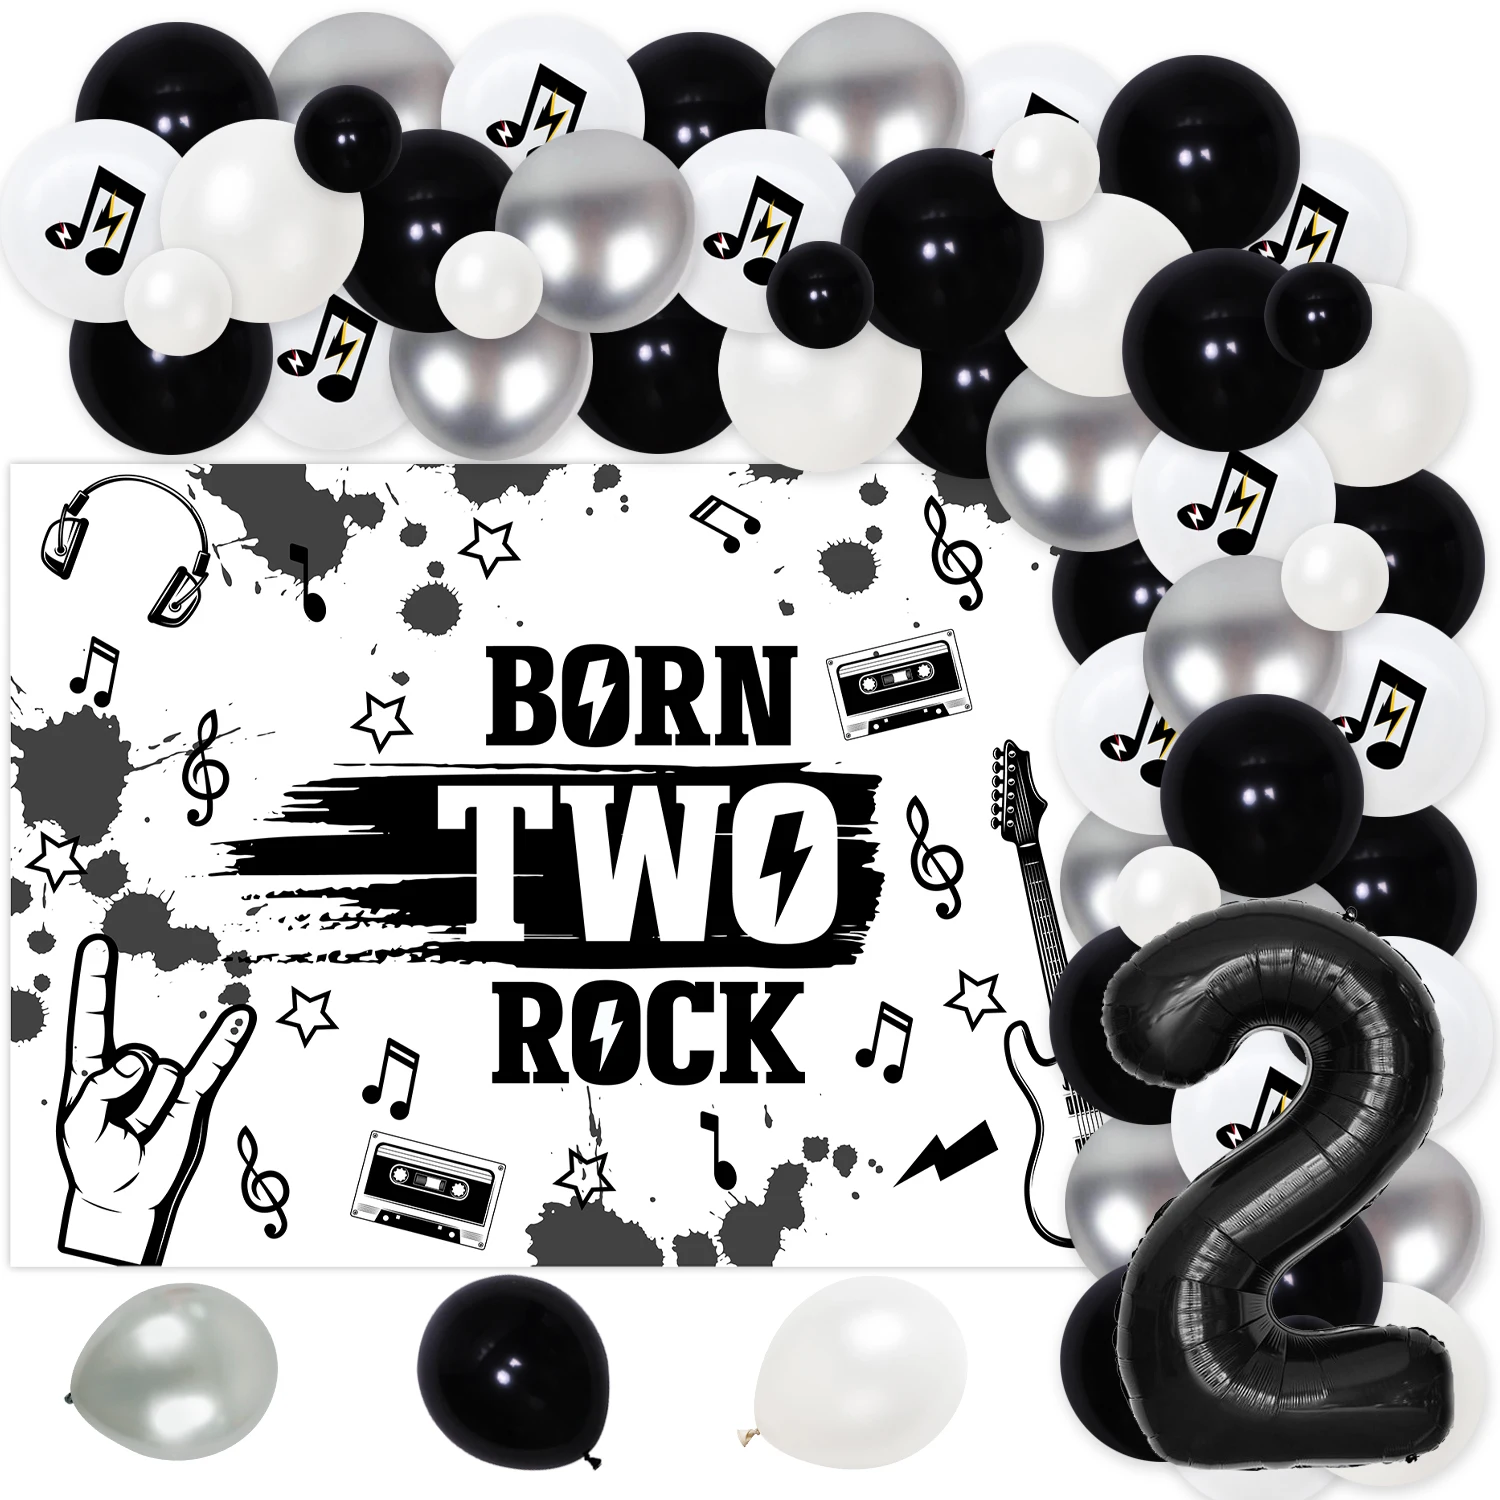 

Born to Rock 2nd Birthday Party Decoration, Rock and Roll, Party Supplies with Two Rock Background, Guitar Black Balloon Arch